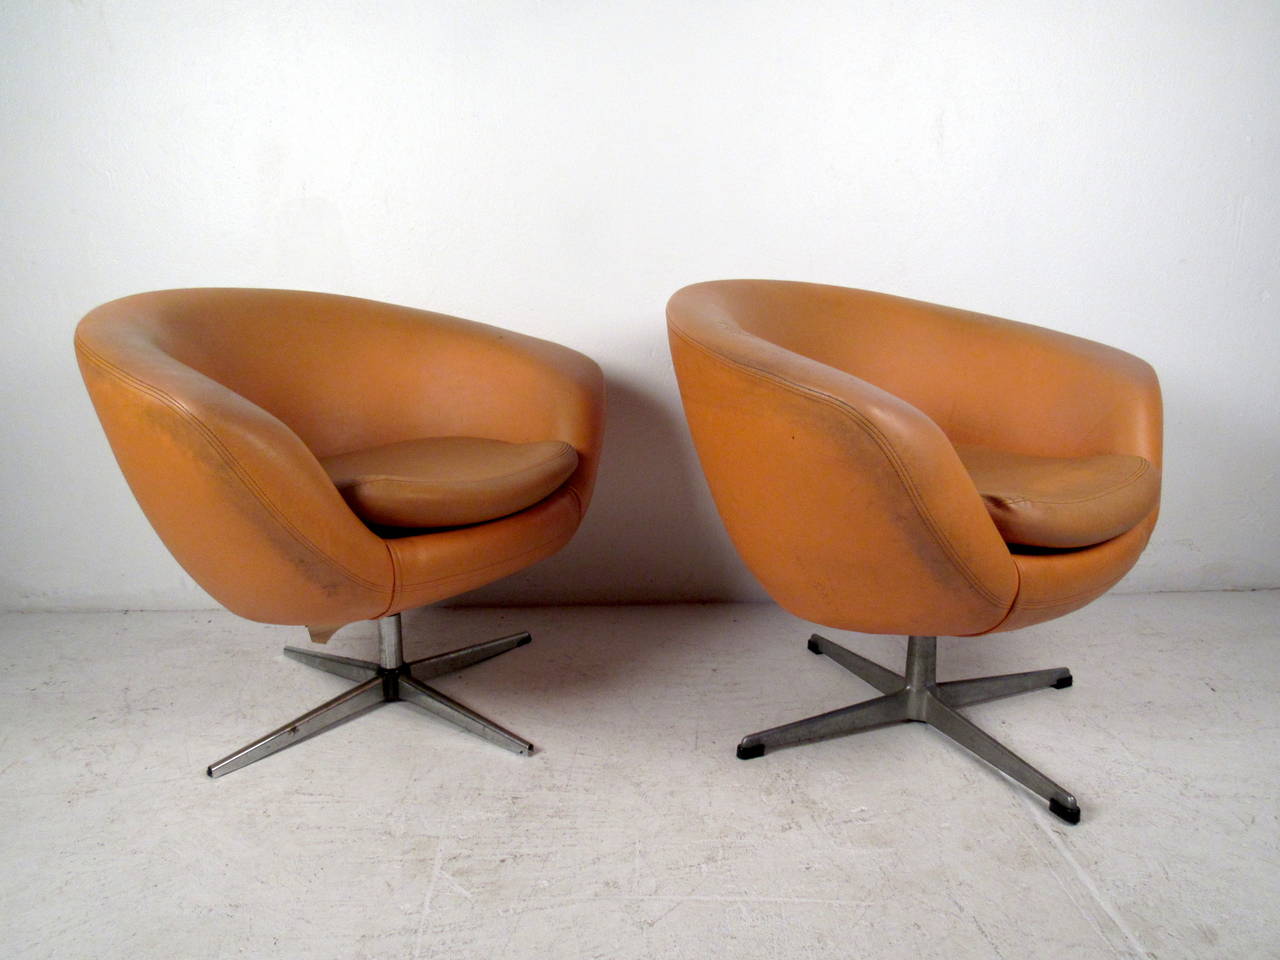 This pair of Mid-Century lounge chairs by Overman feature yellow upholstery with removable cushions and chrome swivel bases which offer a modern look and comfortable seating to any home or office space.

Please confirm item location (NY or NJ)